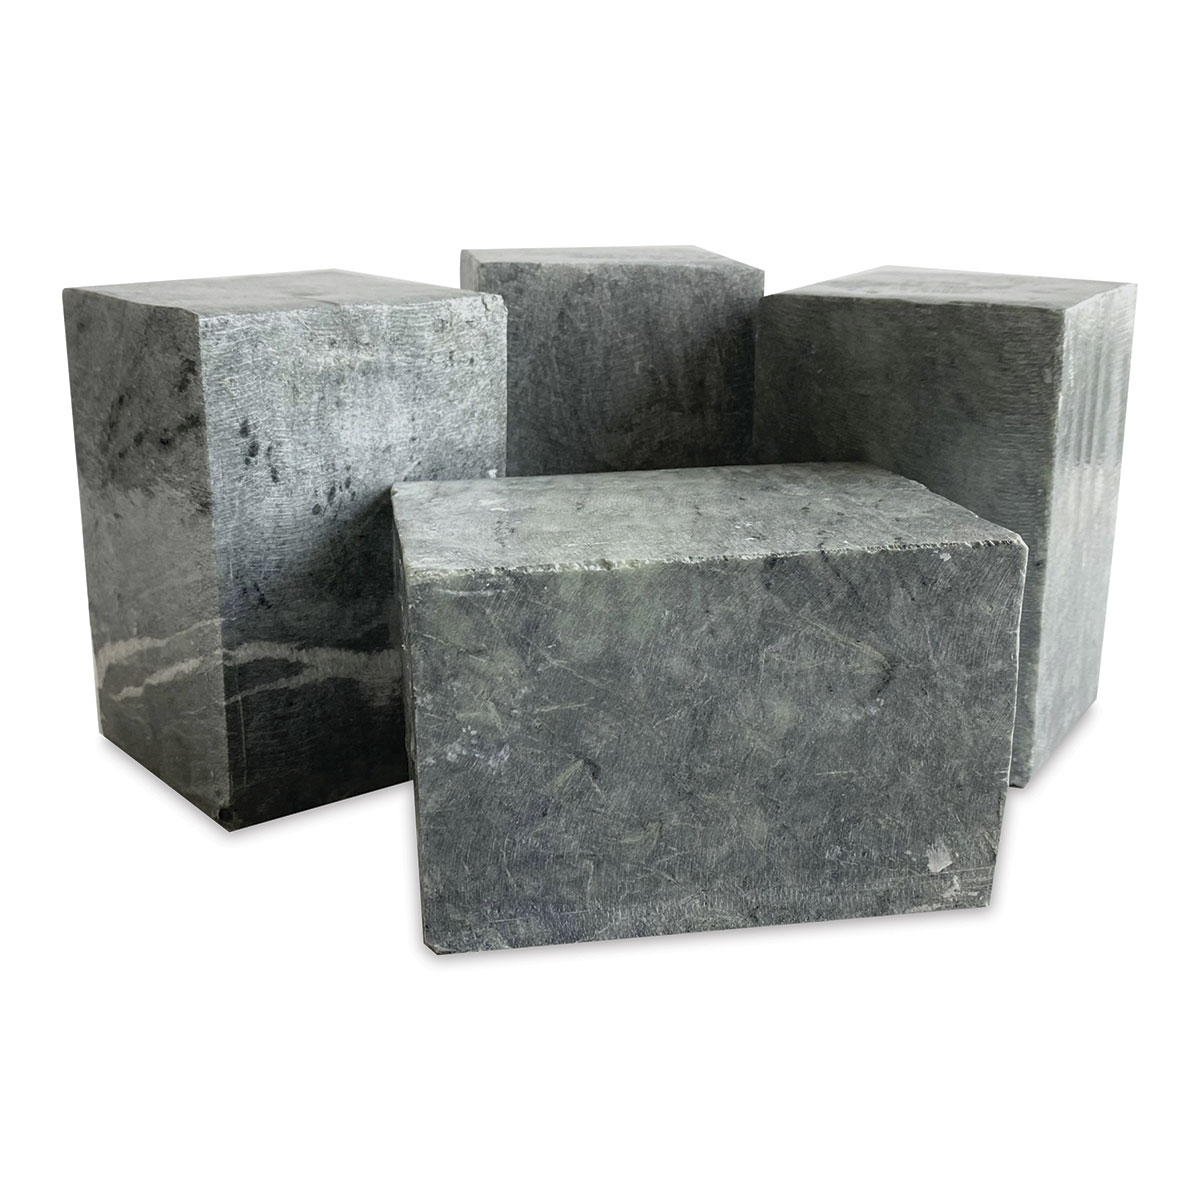 Indian Gray Soapstone 35lb Block 6x6x9 - The Compleat Sculptor